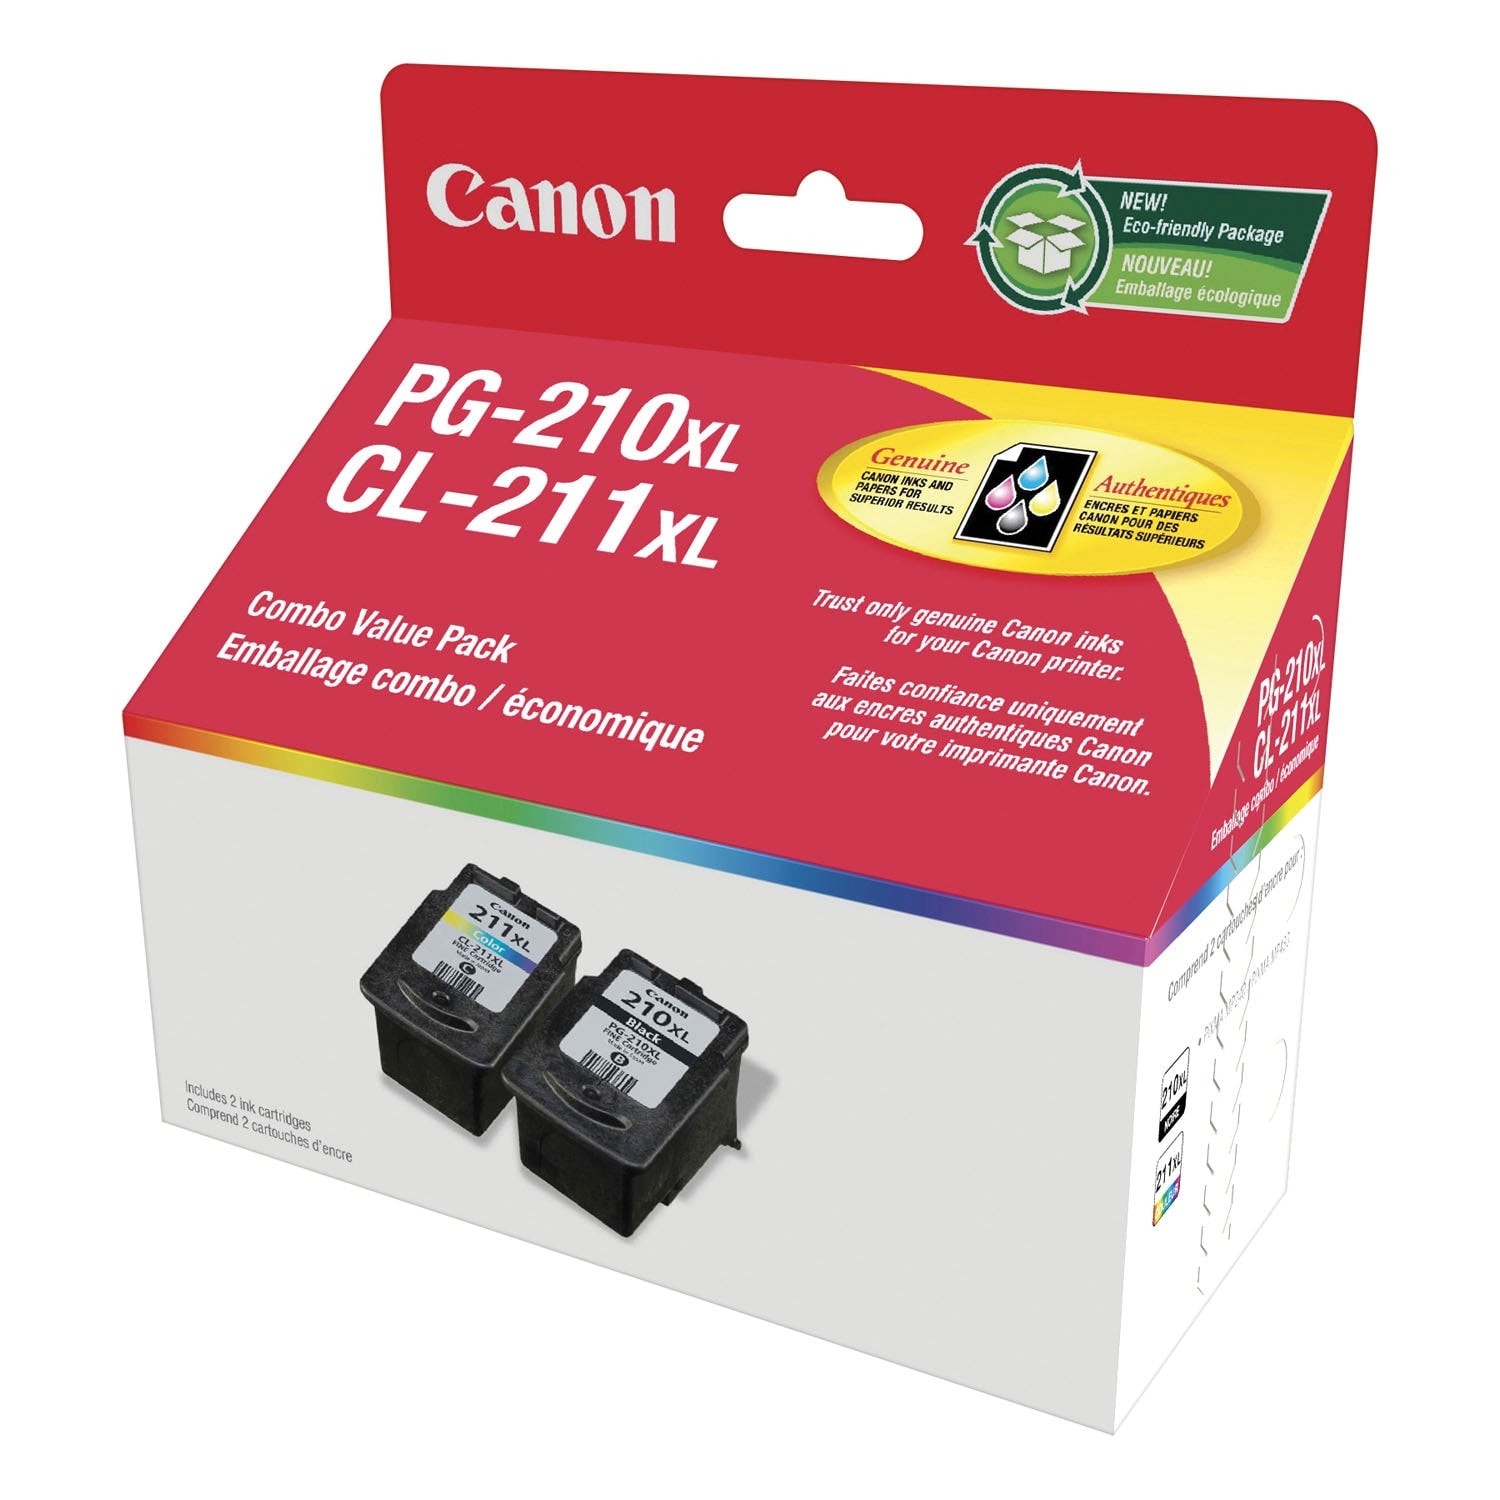 Absolute Toner Canon PG-210XL/CL-211XL High-Yield Ink Cartridges Black and Color | 2973B019 Original Canon Cartridges